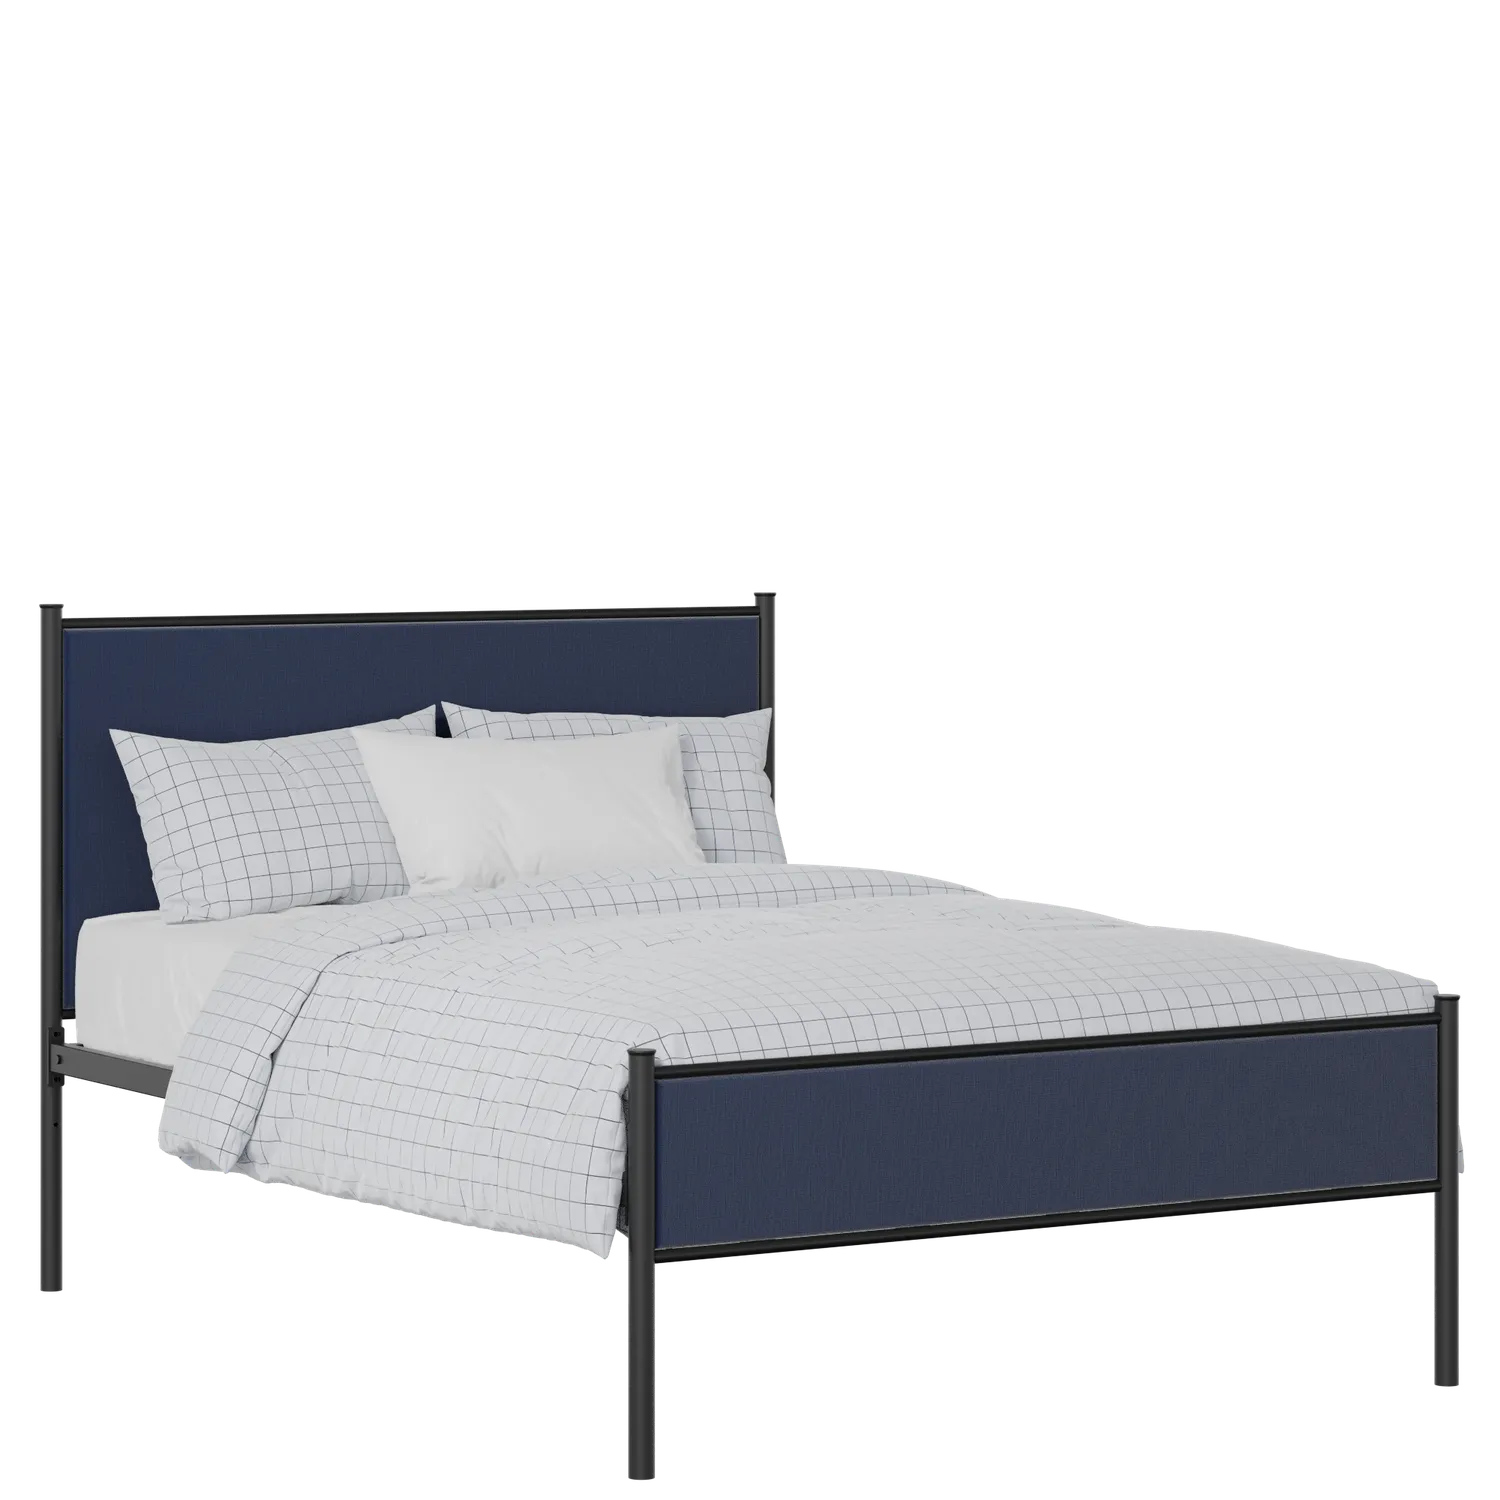 Brest Slim iron/metal upholstered bed in black with blue fabric